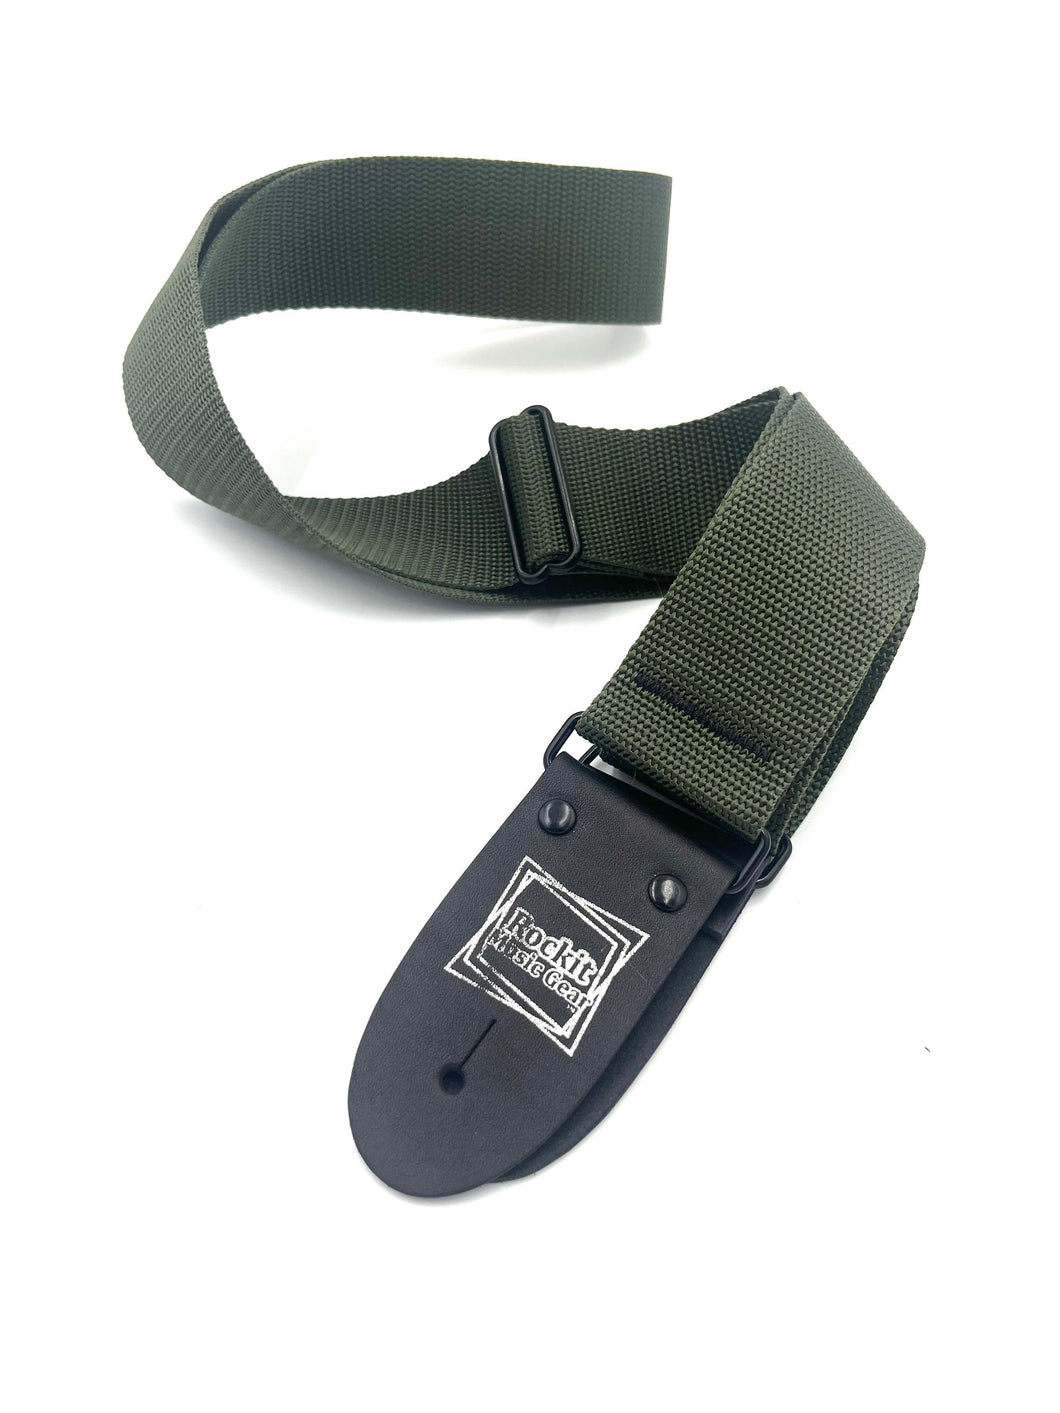 Rockit Music Gear 2 Inch Polypro Guitar Strap - Military Green